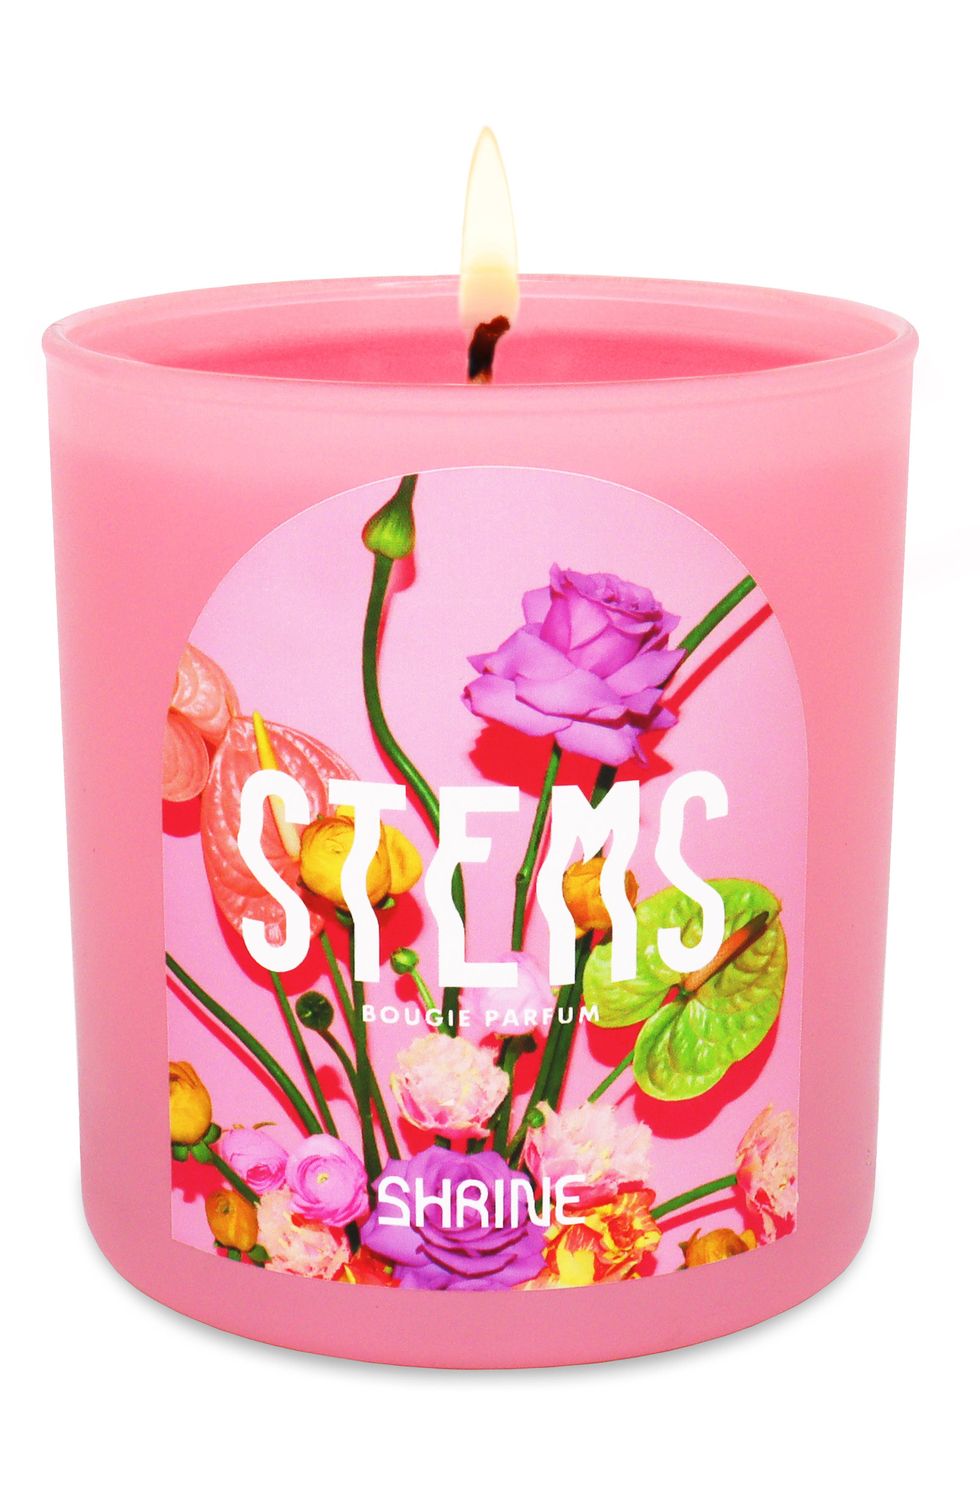 Stems Floral Scented Candle